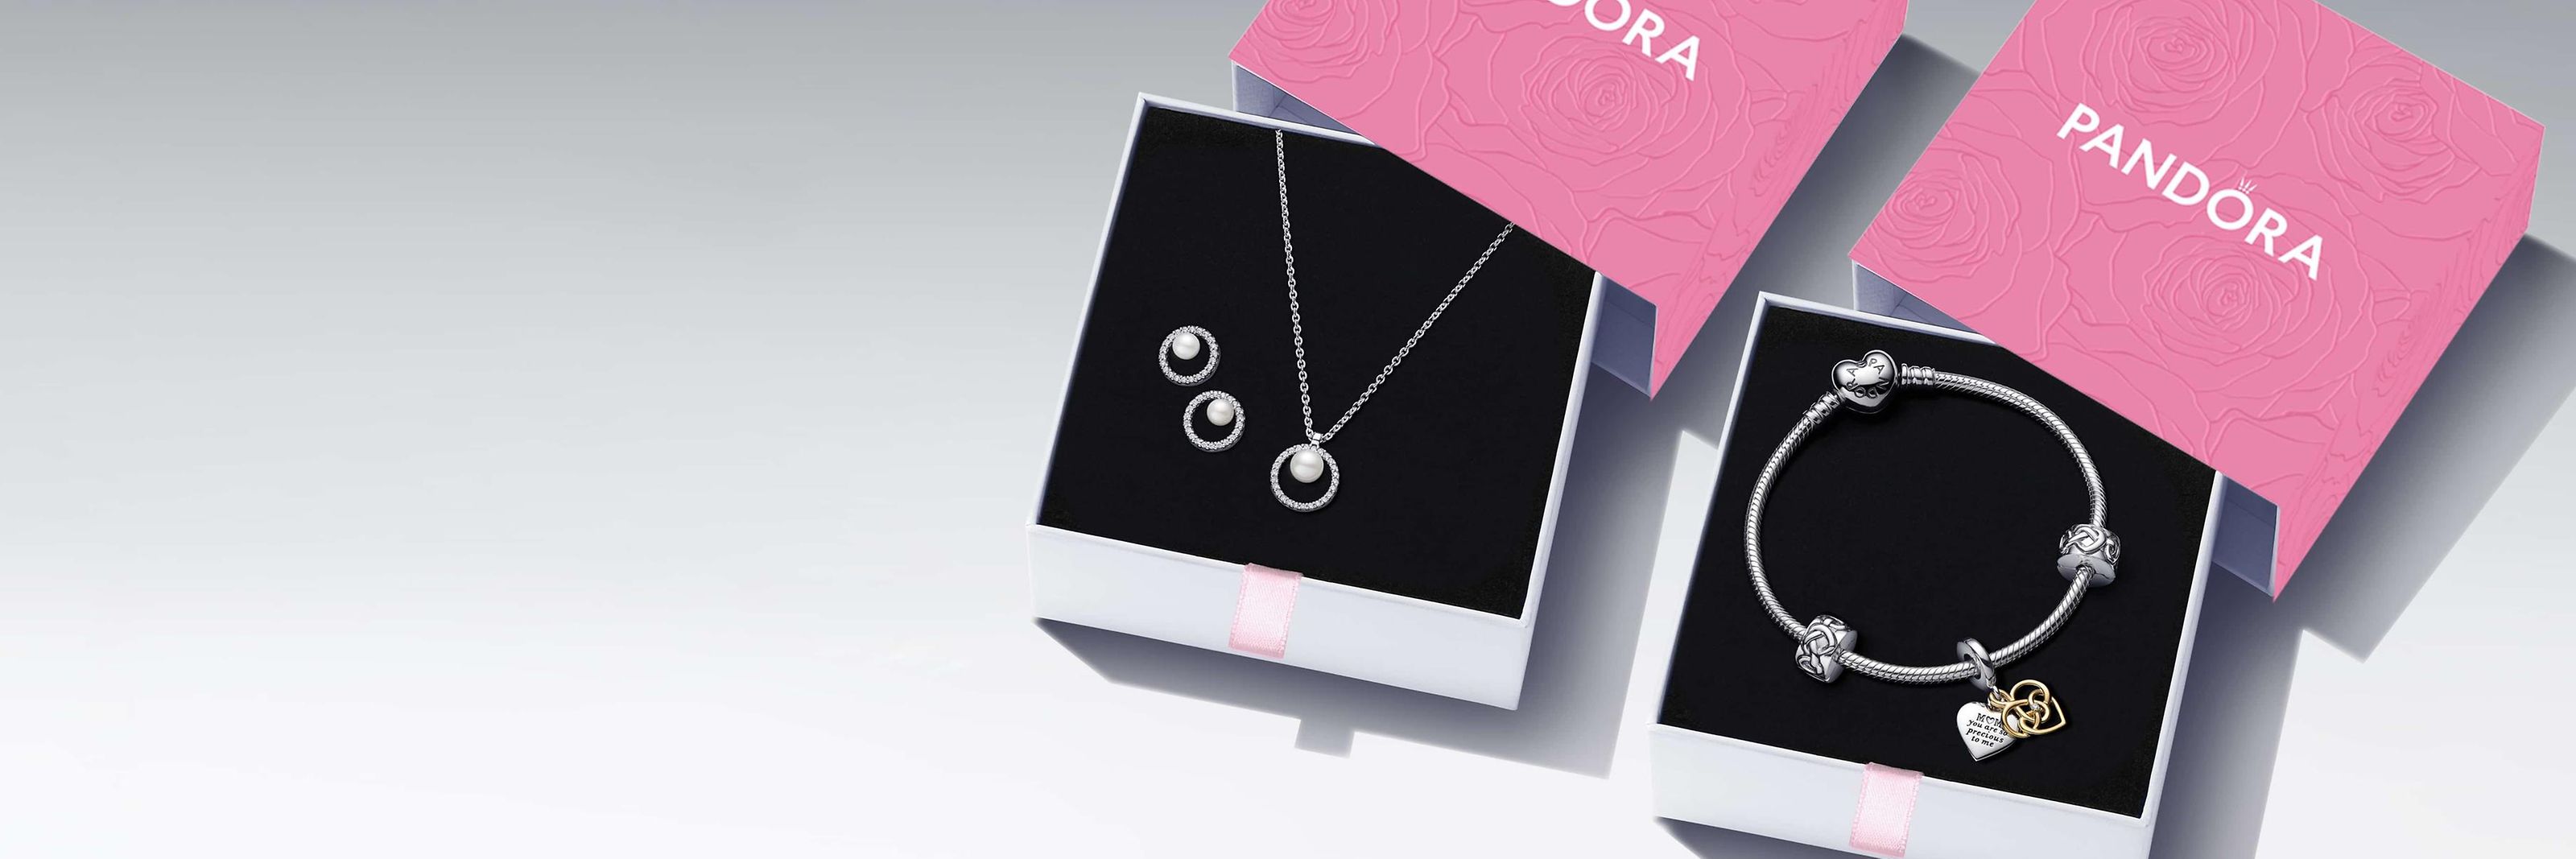 Pandora - Mother’s Day Gift Idea Starting at $89!